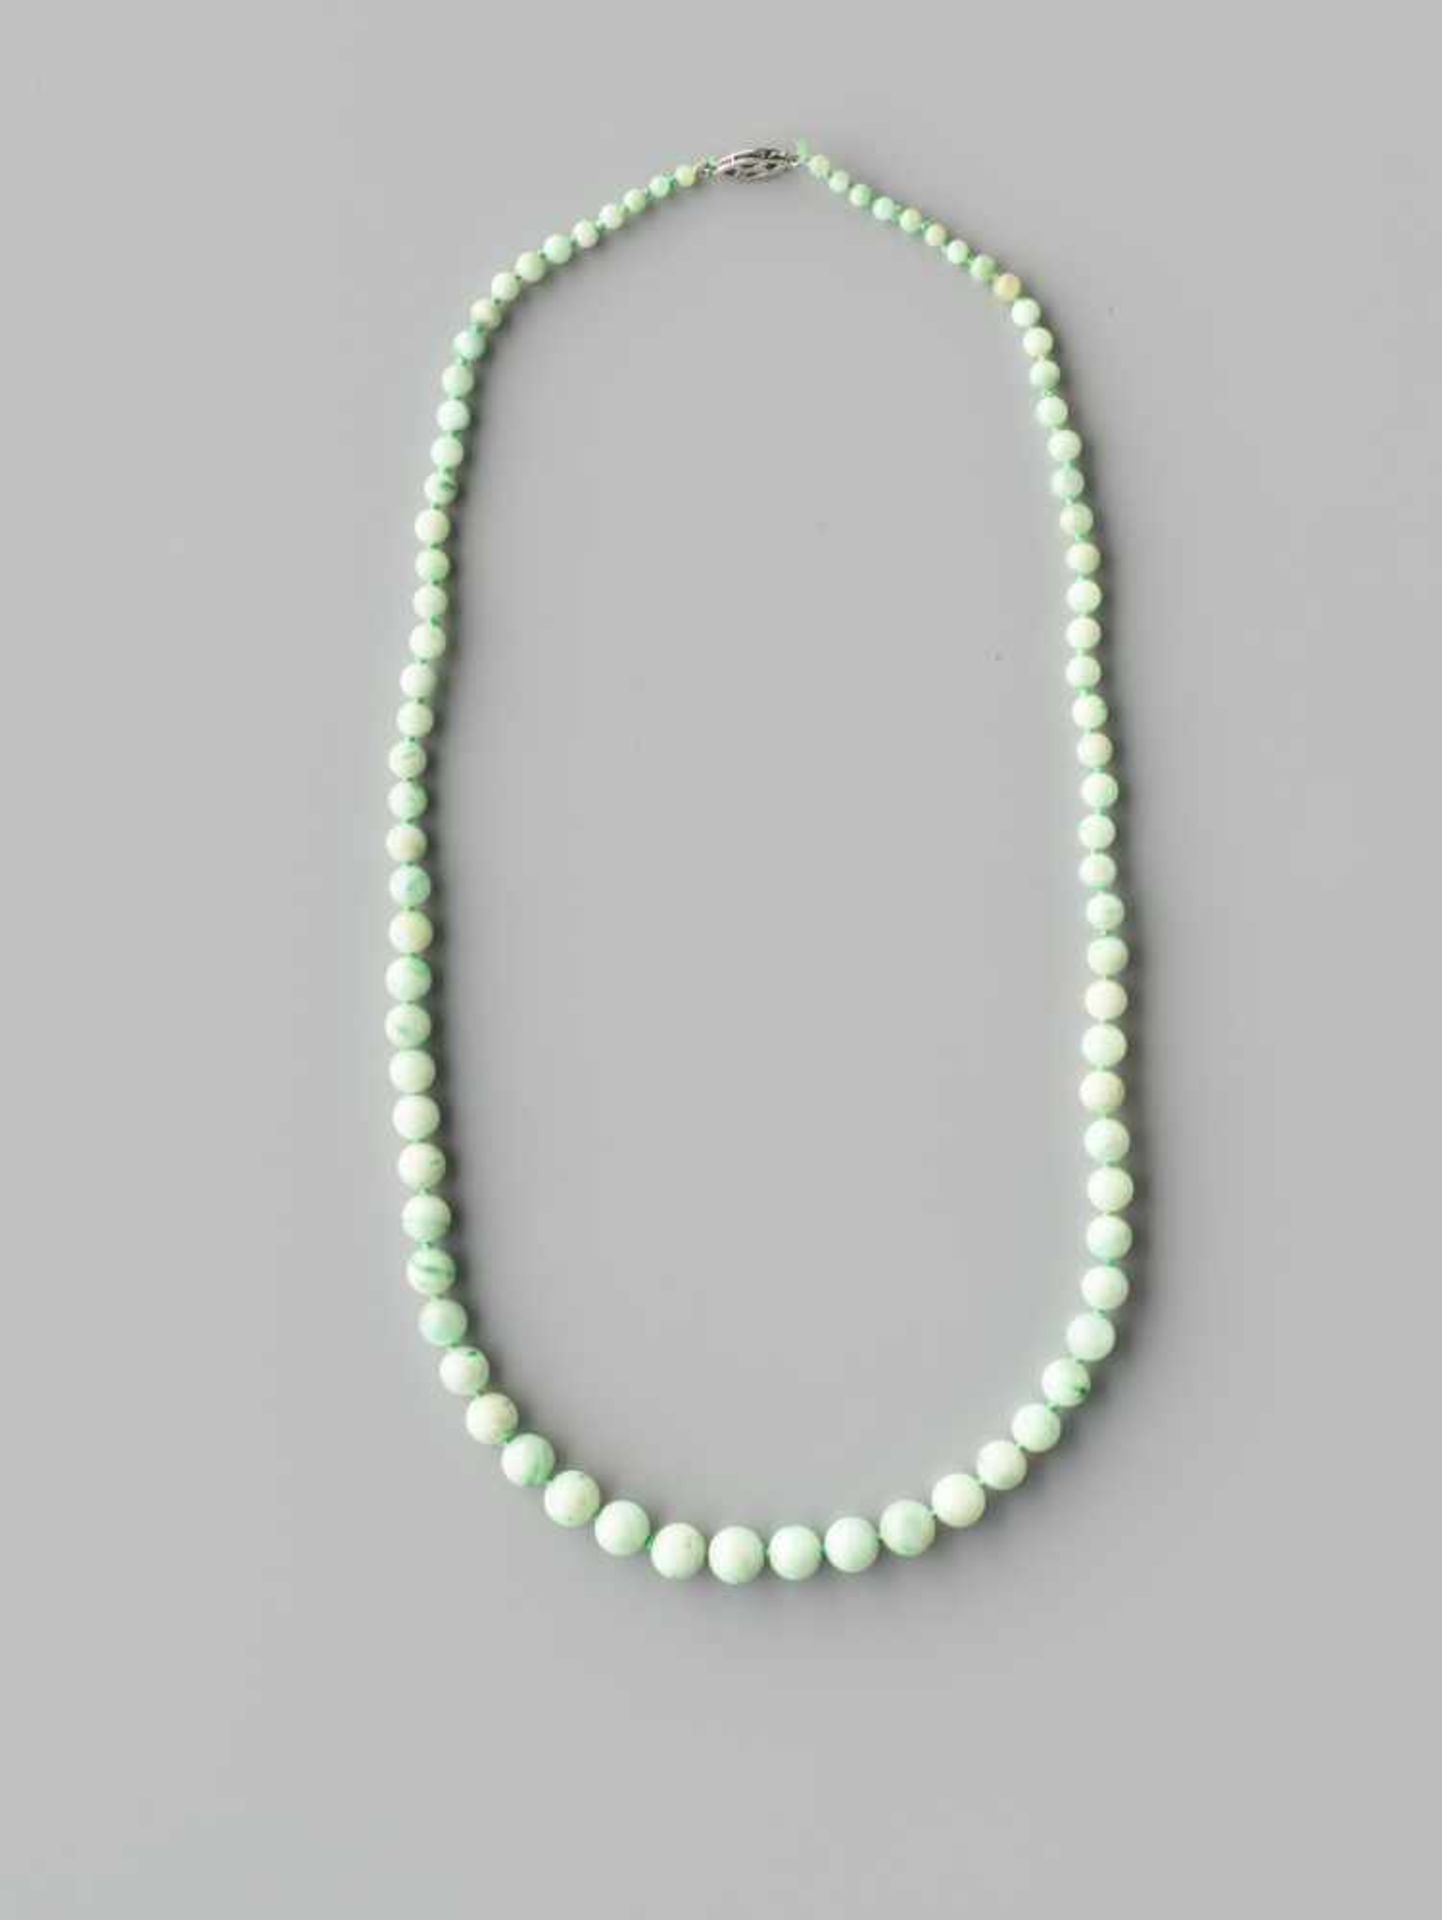 A MINT GREEN JADEITE NECKLACE, 82 BEADS, QING DYNASTYNatural, predominantly mint color, with few